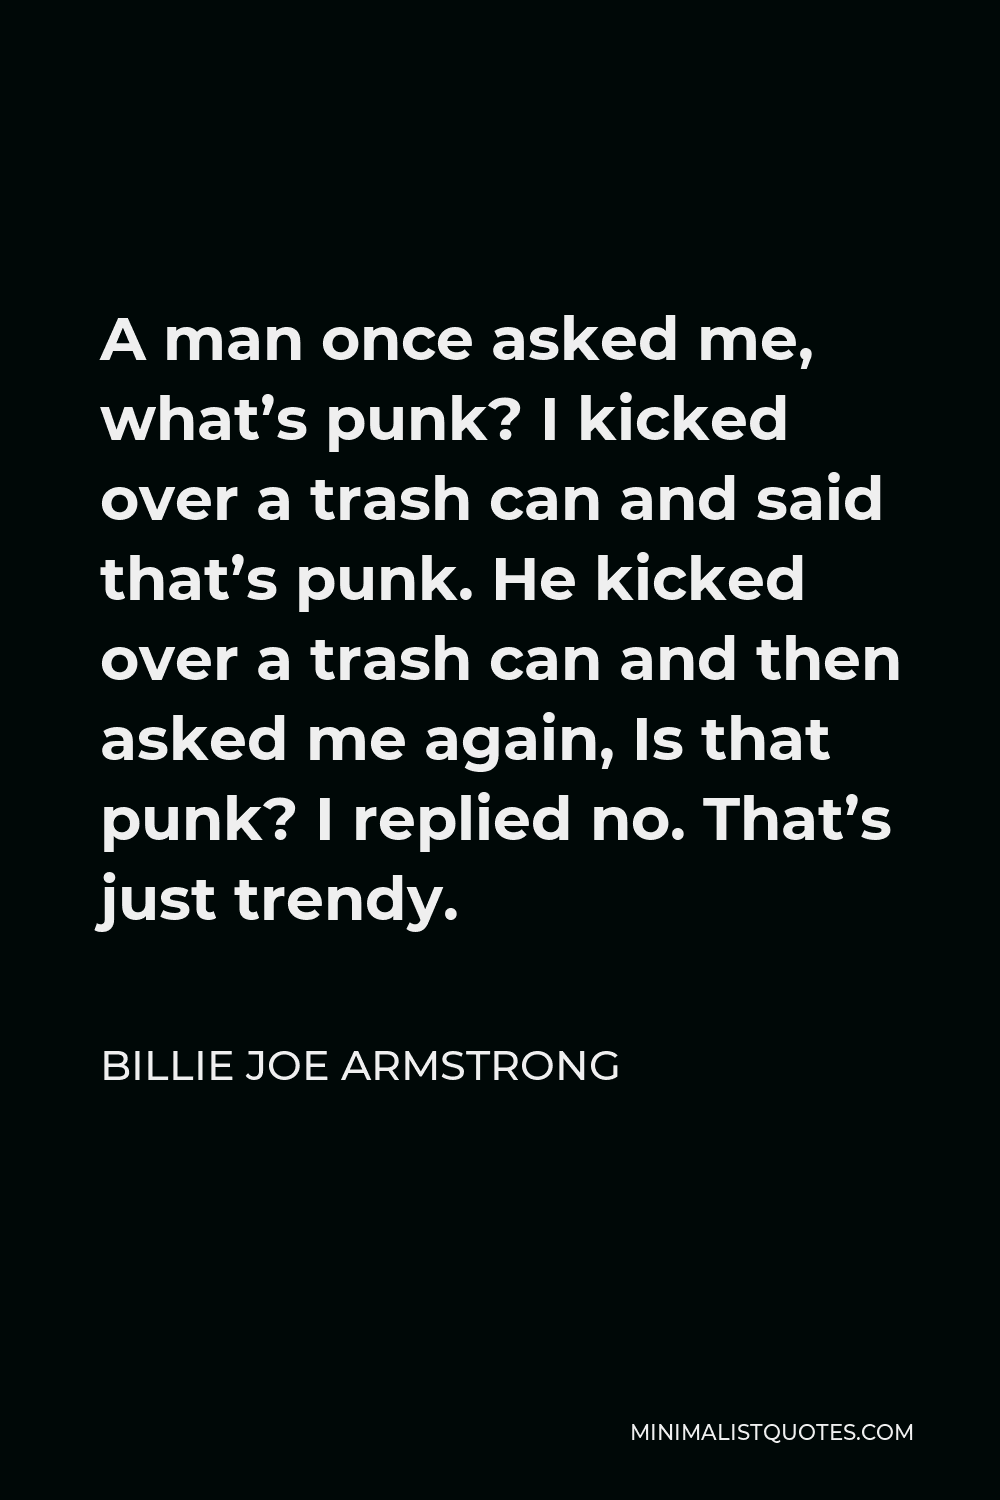 Billie Joe Armstrong Quote - A man once asked me, what’s punk? I kicked over a trash can and said that’s punk. He kicked over a trash can and then asked me again, Is that punk? I replied no. That’s just trendy.